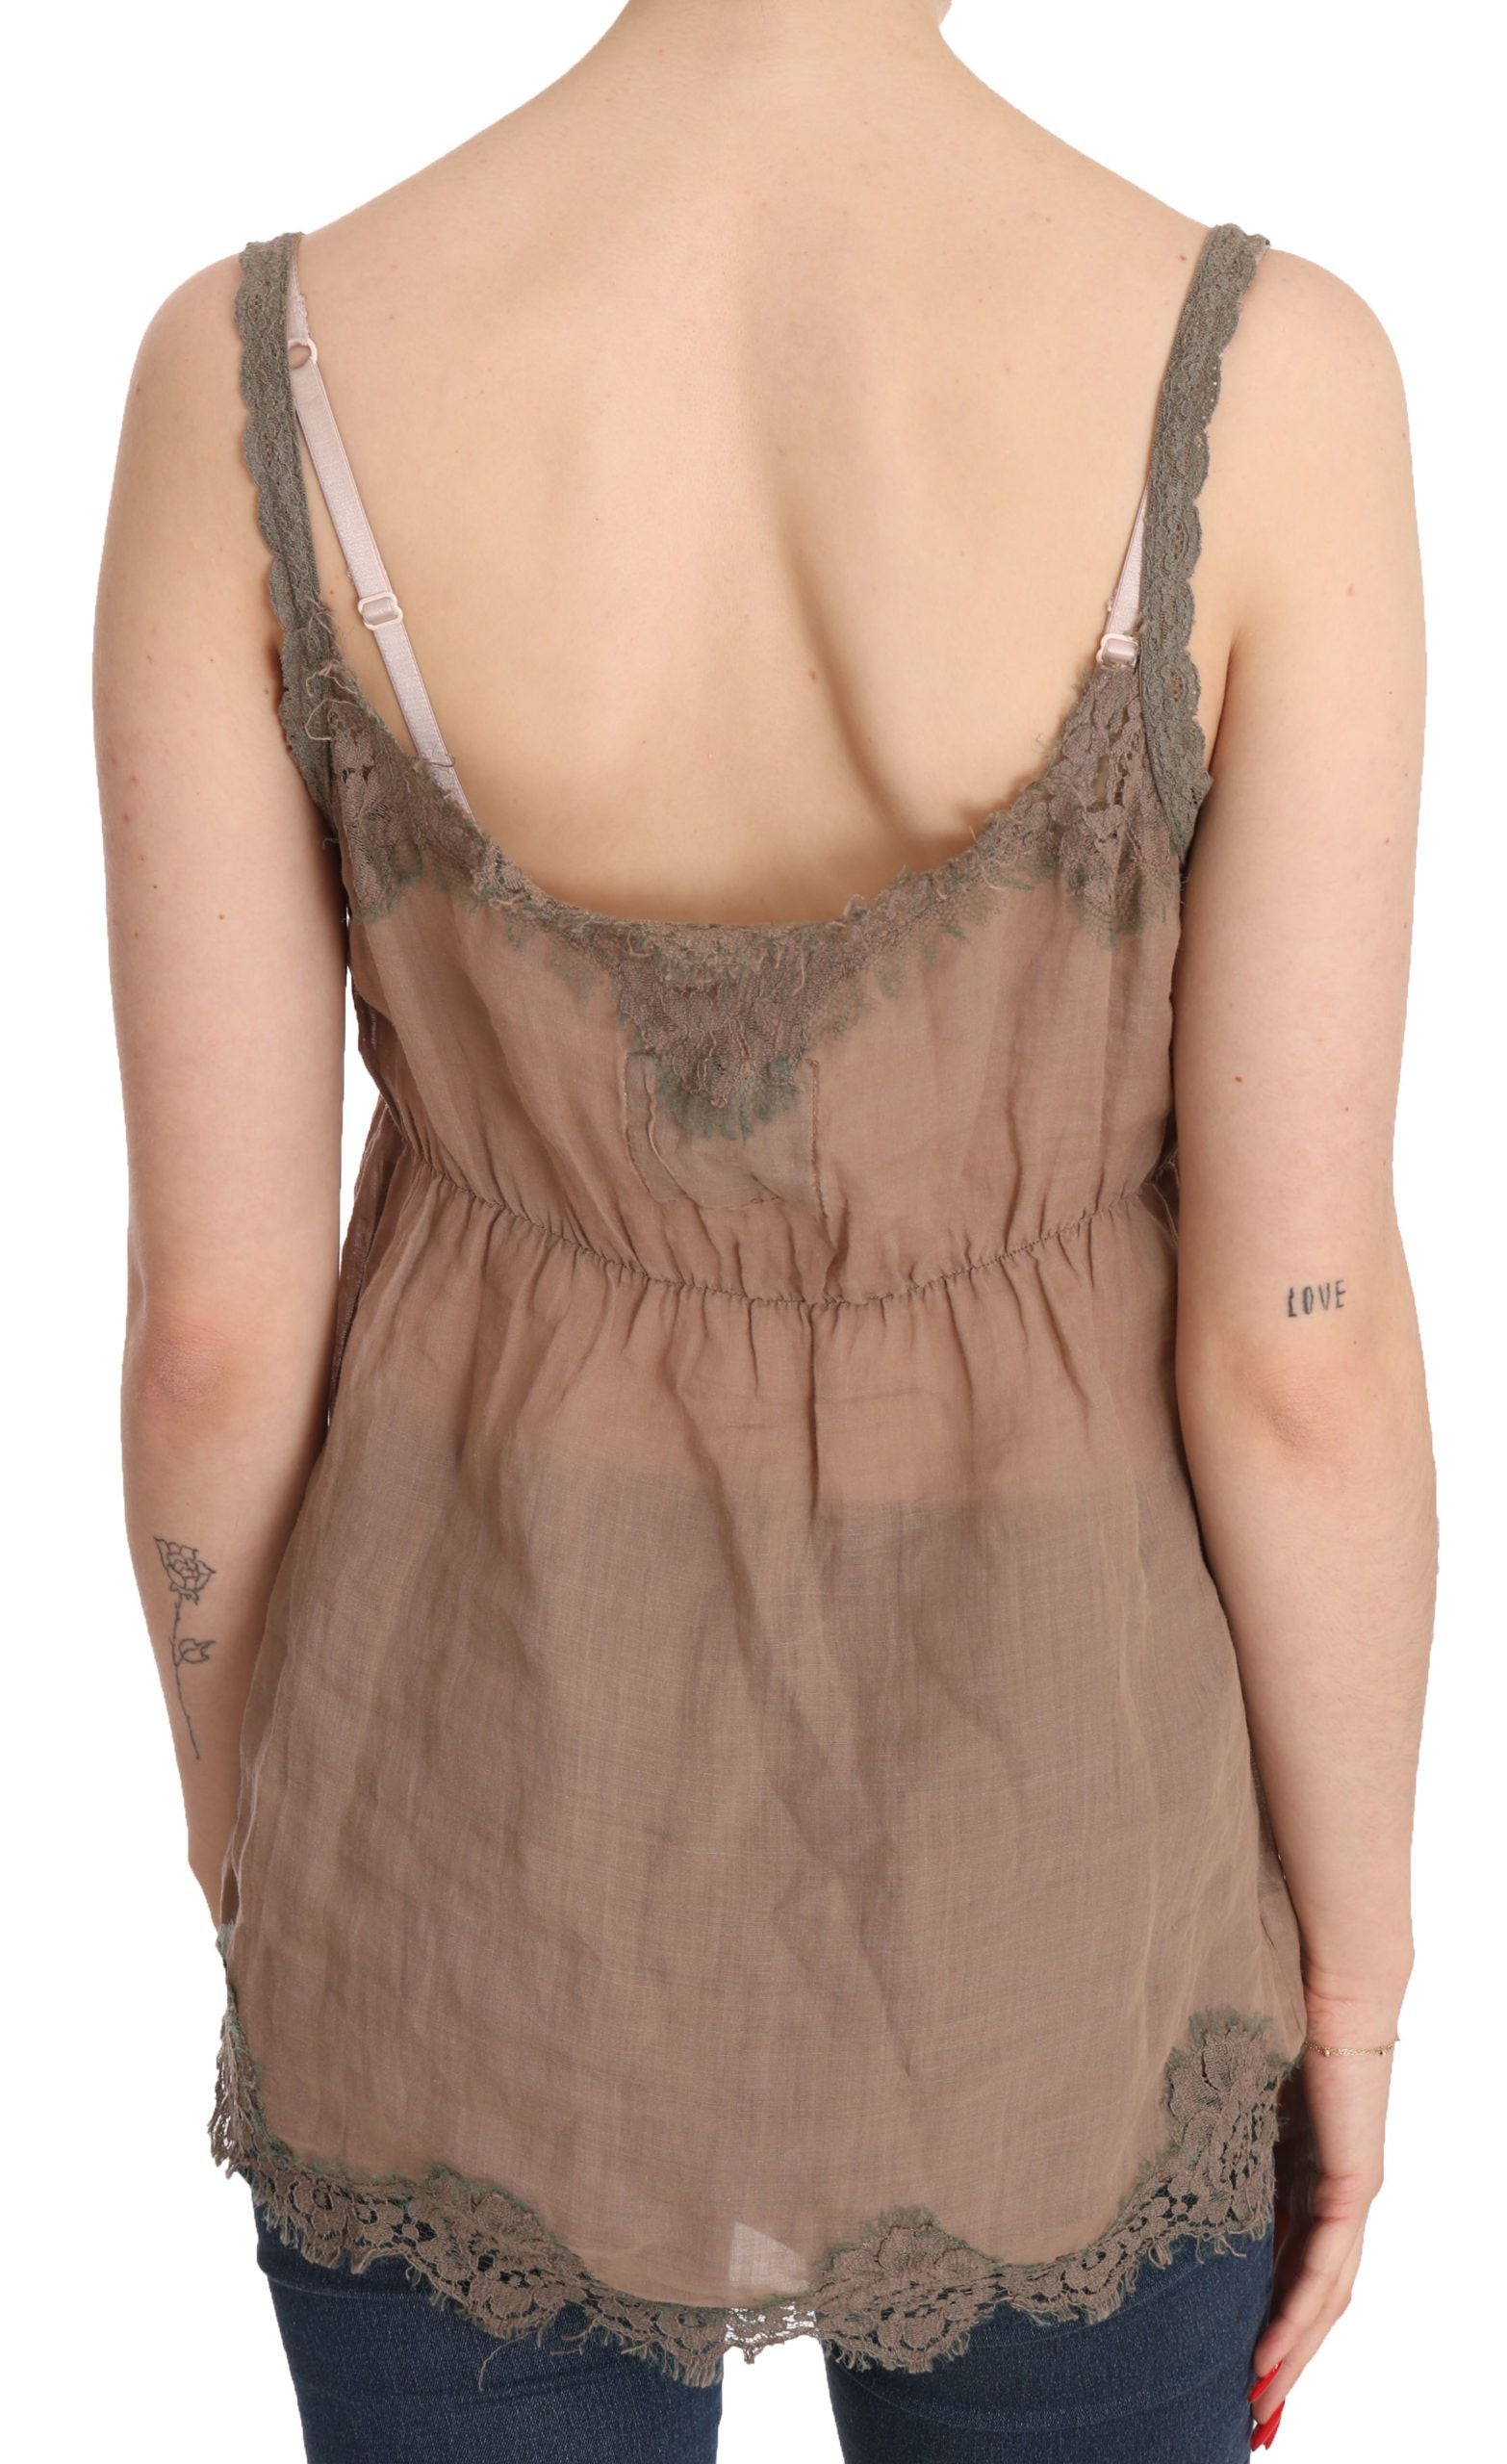 Brown Lace Spaghetti Strap Plunging Top Blouse - Designed by PINK MEMORIES Available to Buy at a Discounted Price on Moon Behind The Hill Online Designer Discount Store